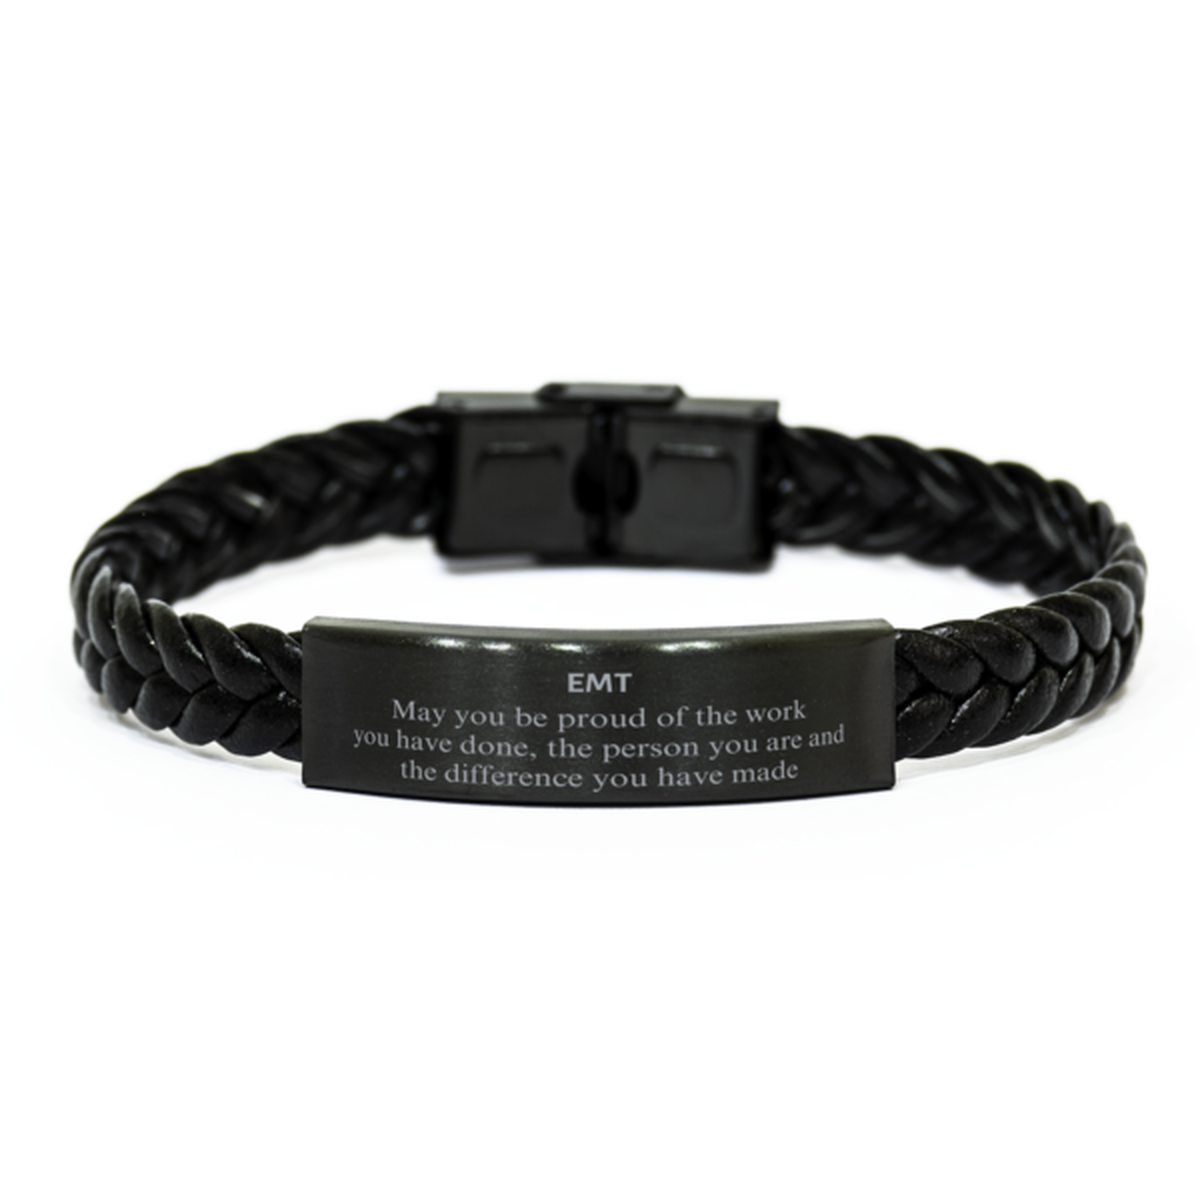 EMT May you be proud of the work you have done, Retirement EMT Braided Leather Bracelet for Colleague Appreciation Gifts Amazing for EMT